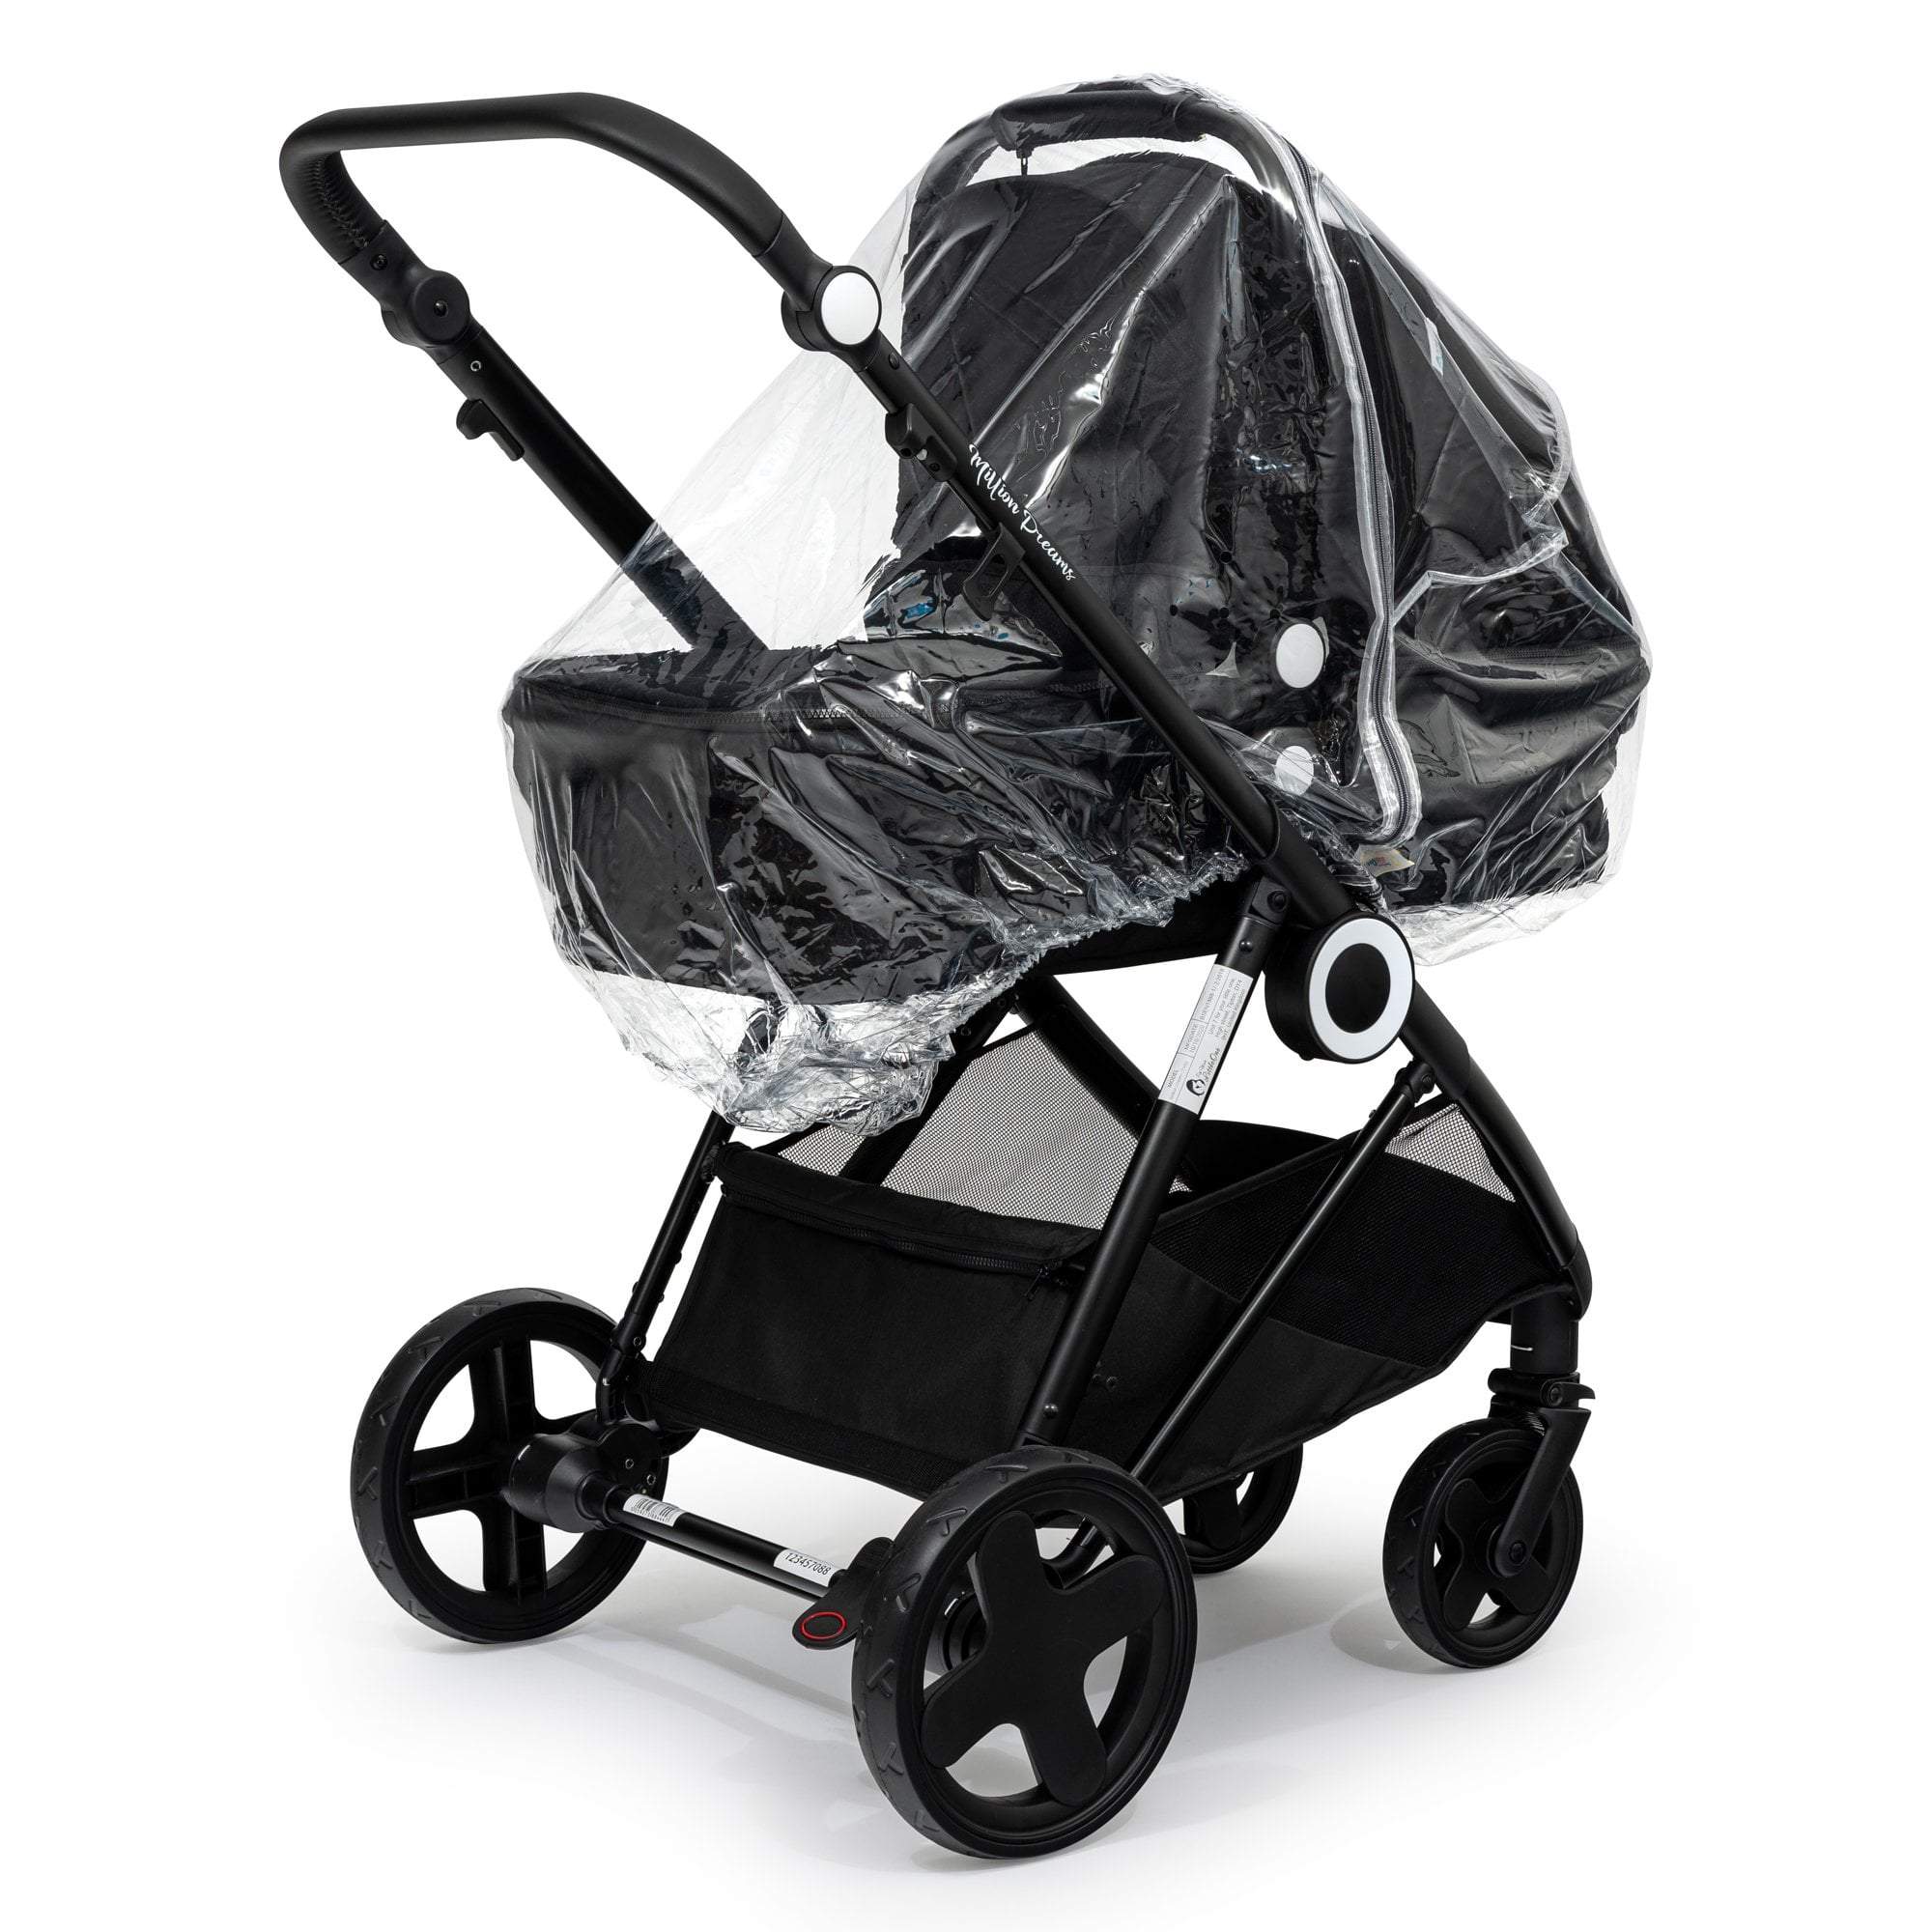 Carrycot Raincover Compatible with ABC Design - Fits All Models - For Your Little One